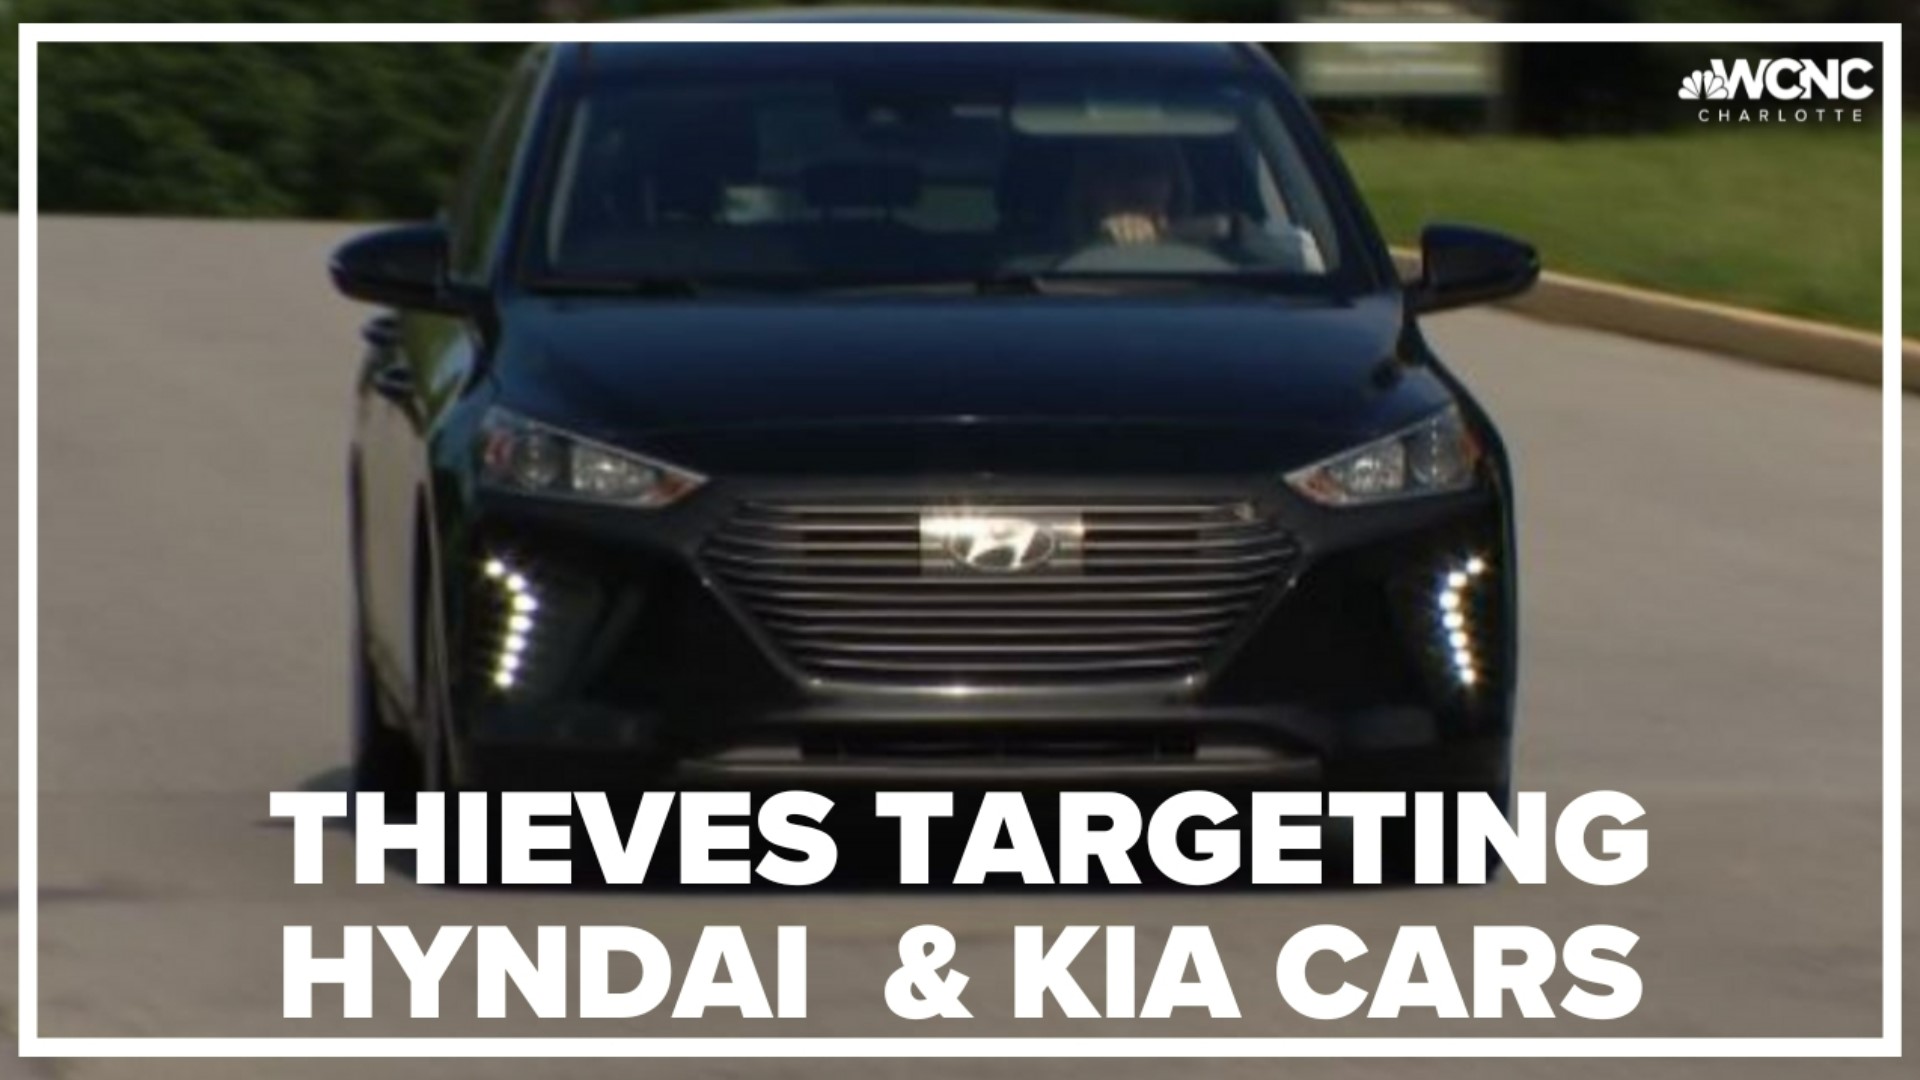 Charlotte-Mecklenburg Police say thieves are targeting Hyundai and Kia cars to steal and take on joyrides.